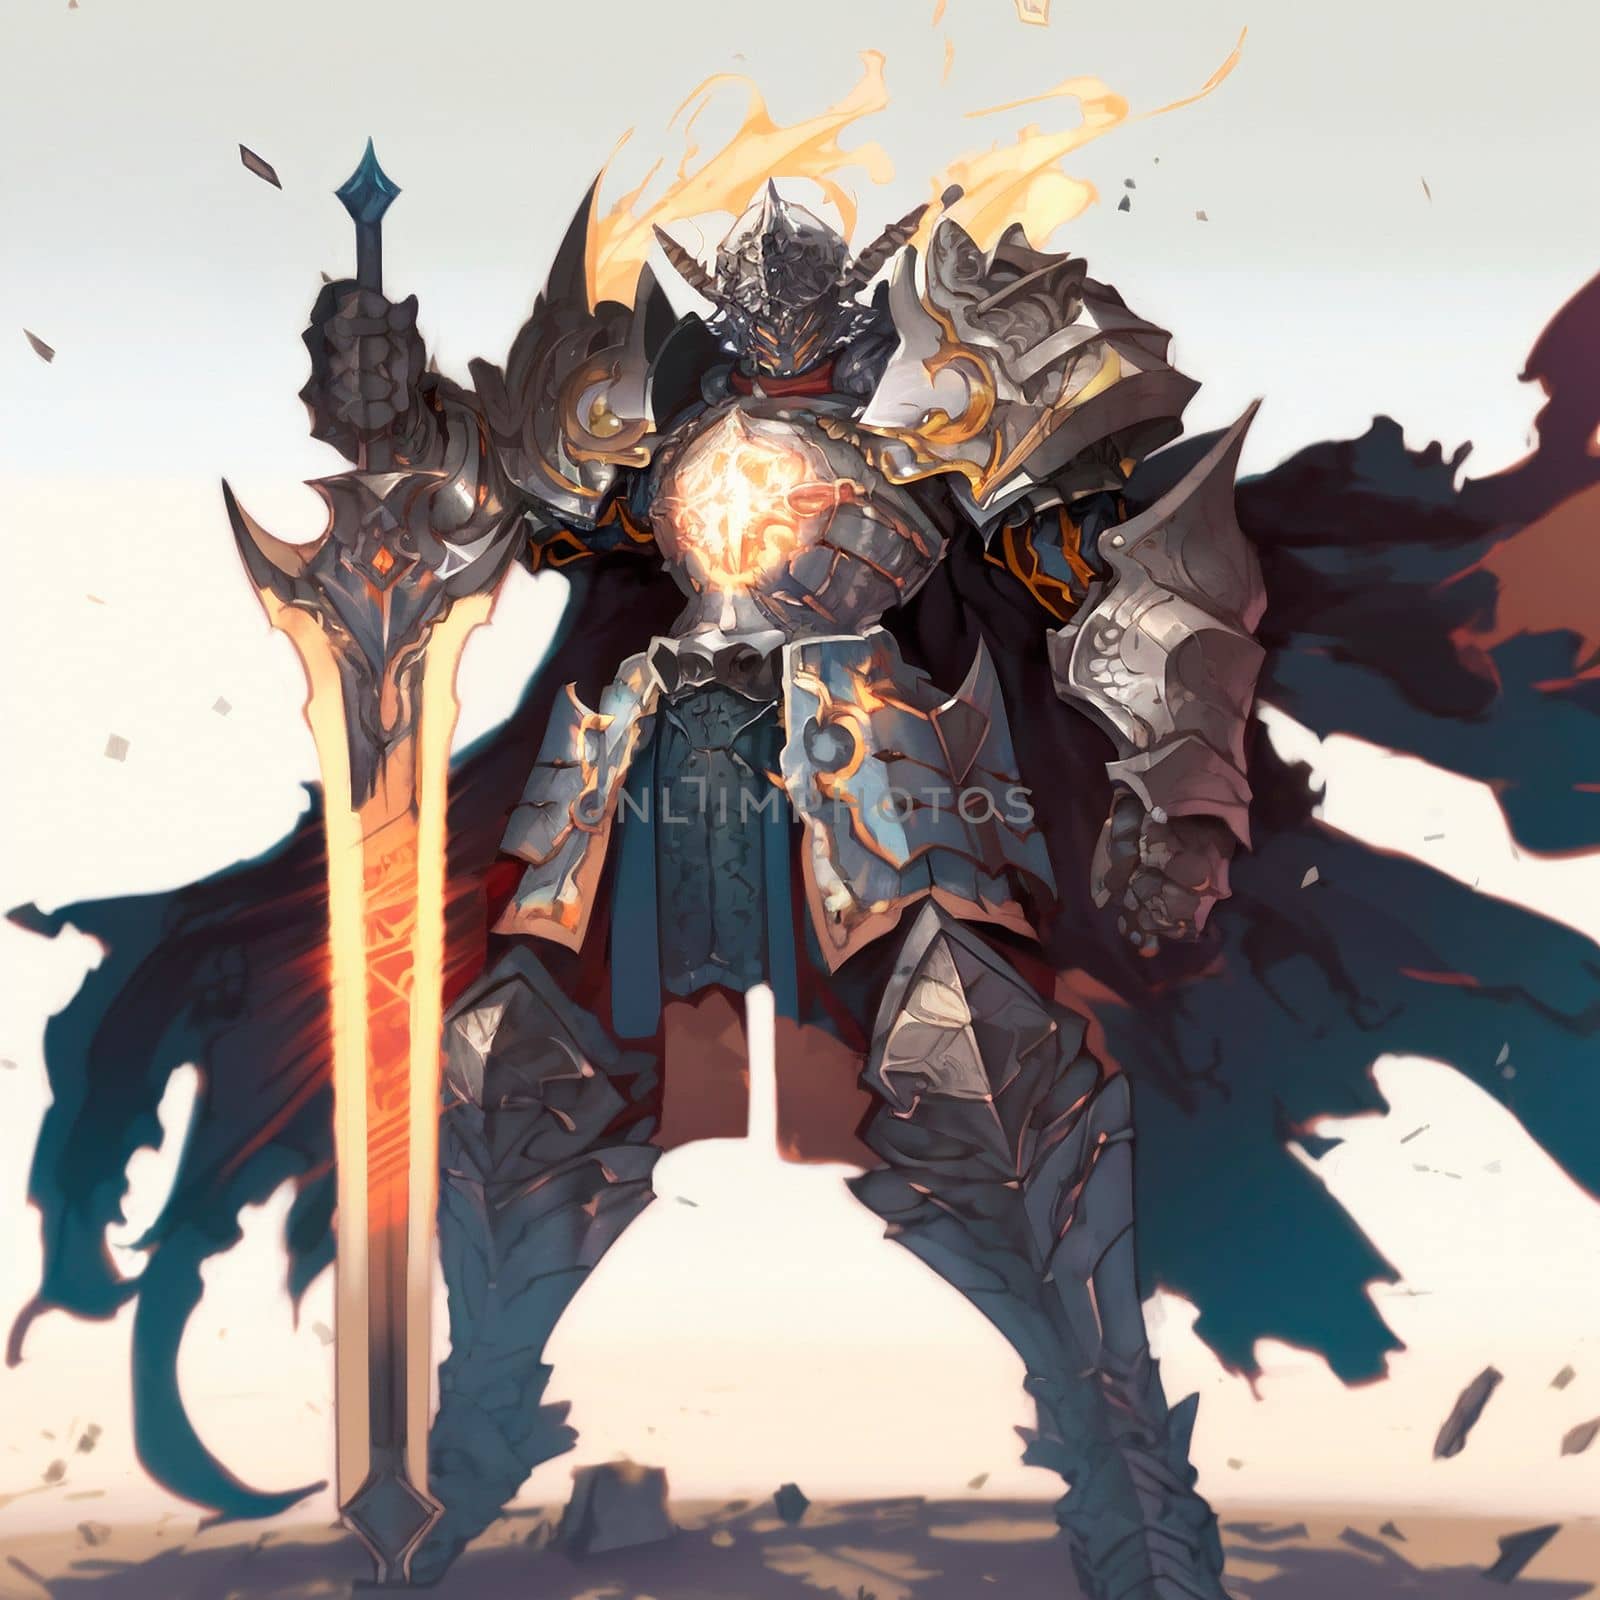 A stern knight in heavy armor in the style of fantasy by NeuroSky